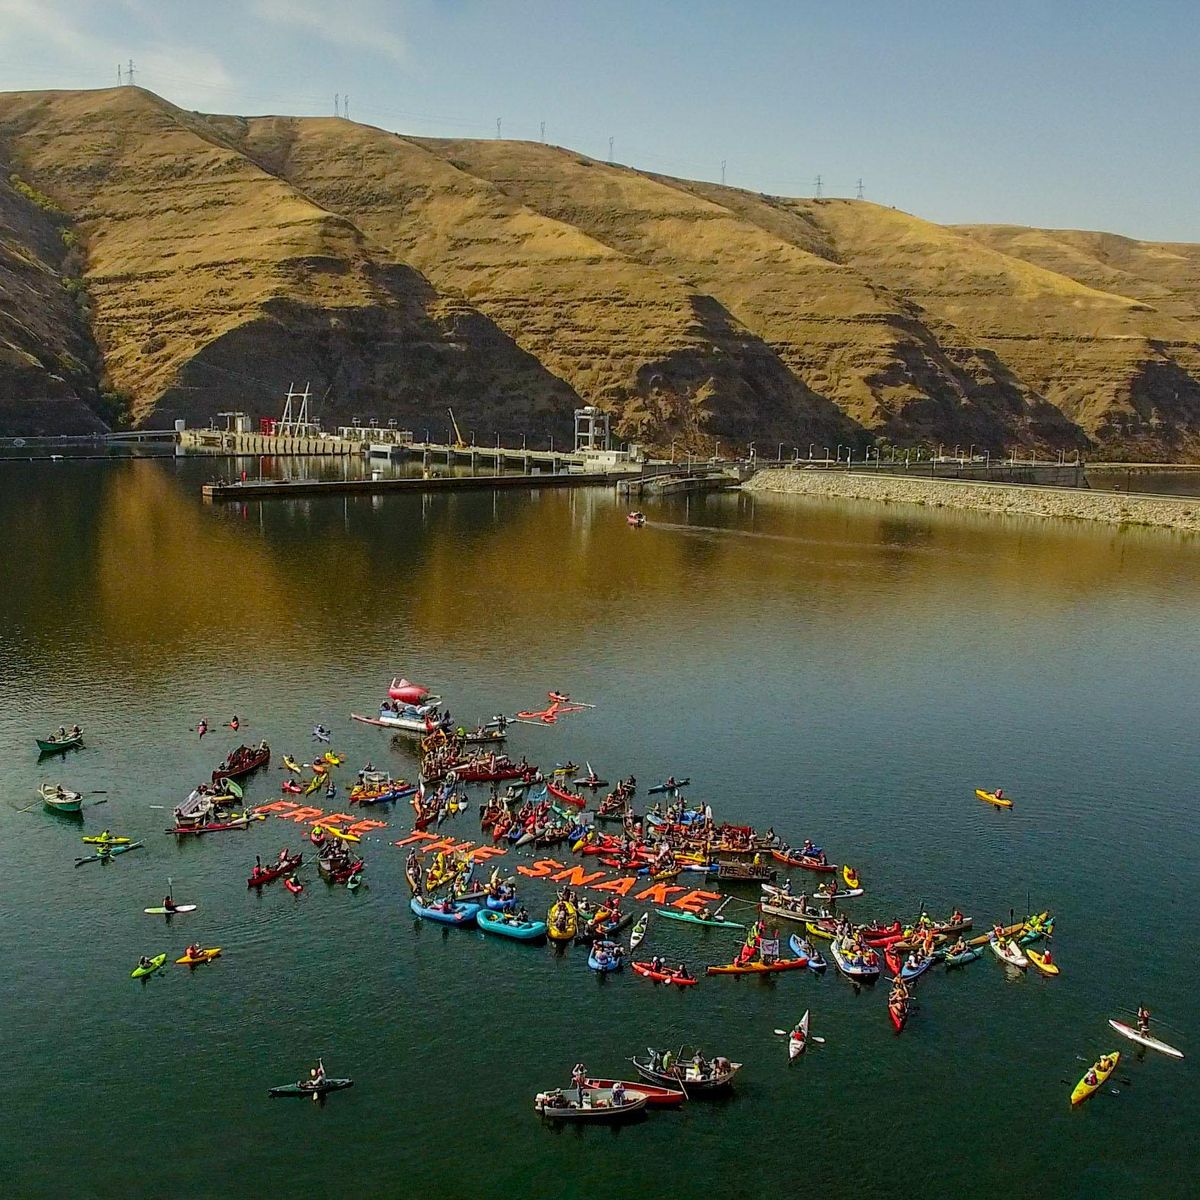 More than 160 boats and 300 advocates staged a peaceful protest, dubbed ‘Free the Snake,’ between Wawawai Landing and Lower Granite Dam on Oct. 3, 2015, calling for breaching the lower four Snake River dams primarily for the benefit of endangered salmon and steelhead fisheries. (Photo by Ben Moon / Photo by Ben Moon)